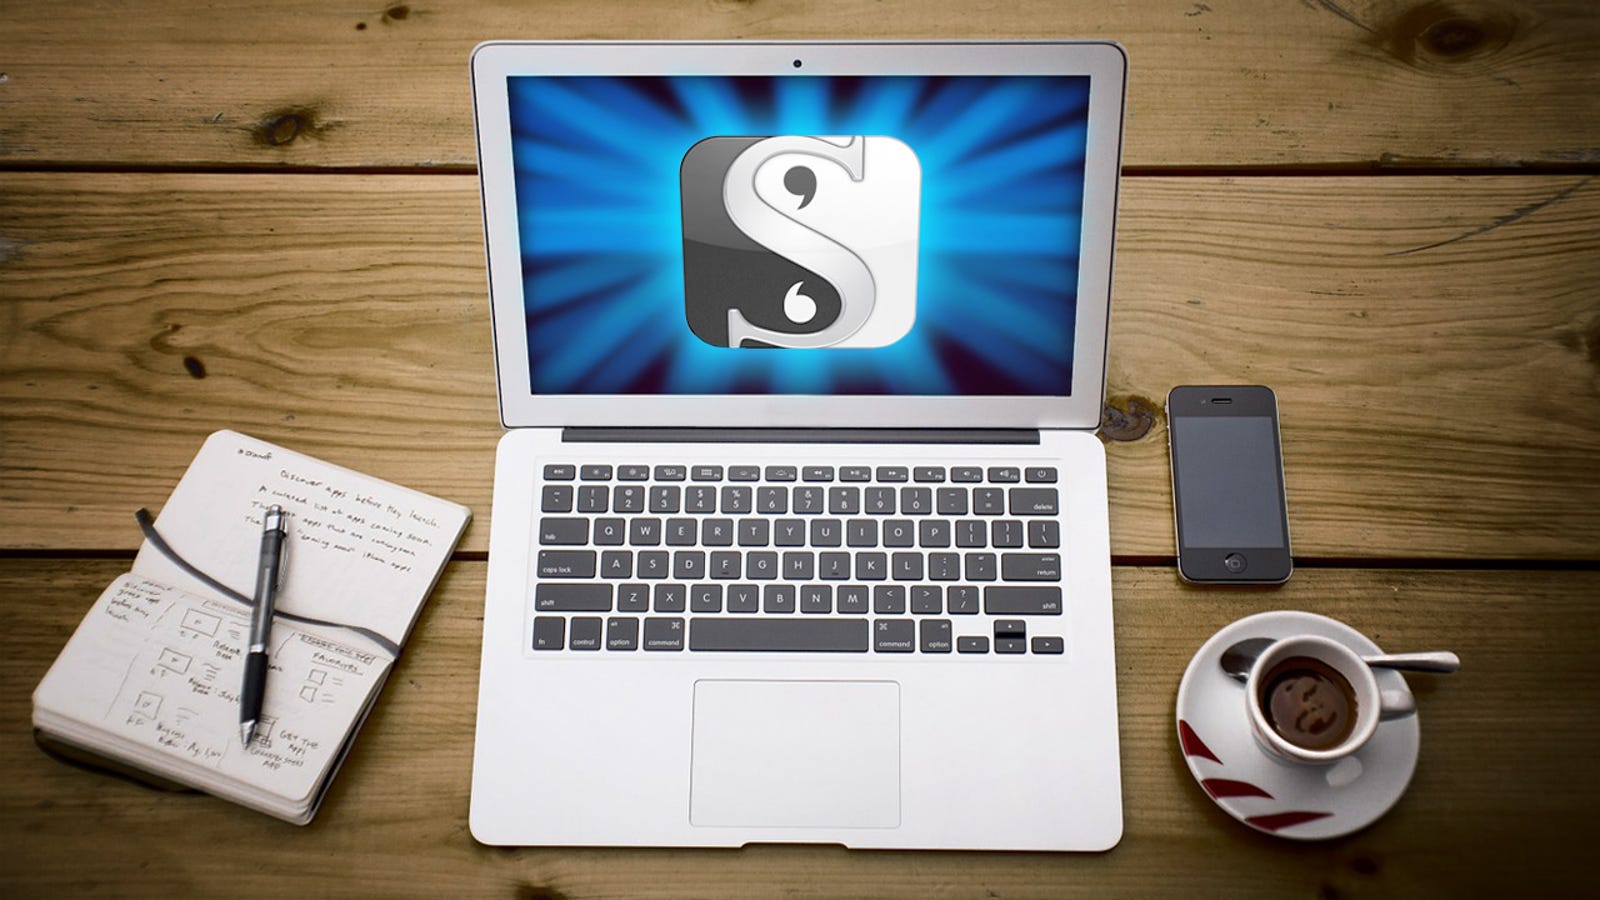 30 day free trial scrivener for mac